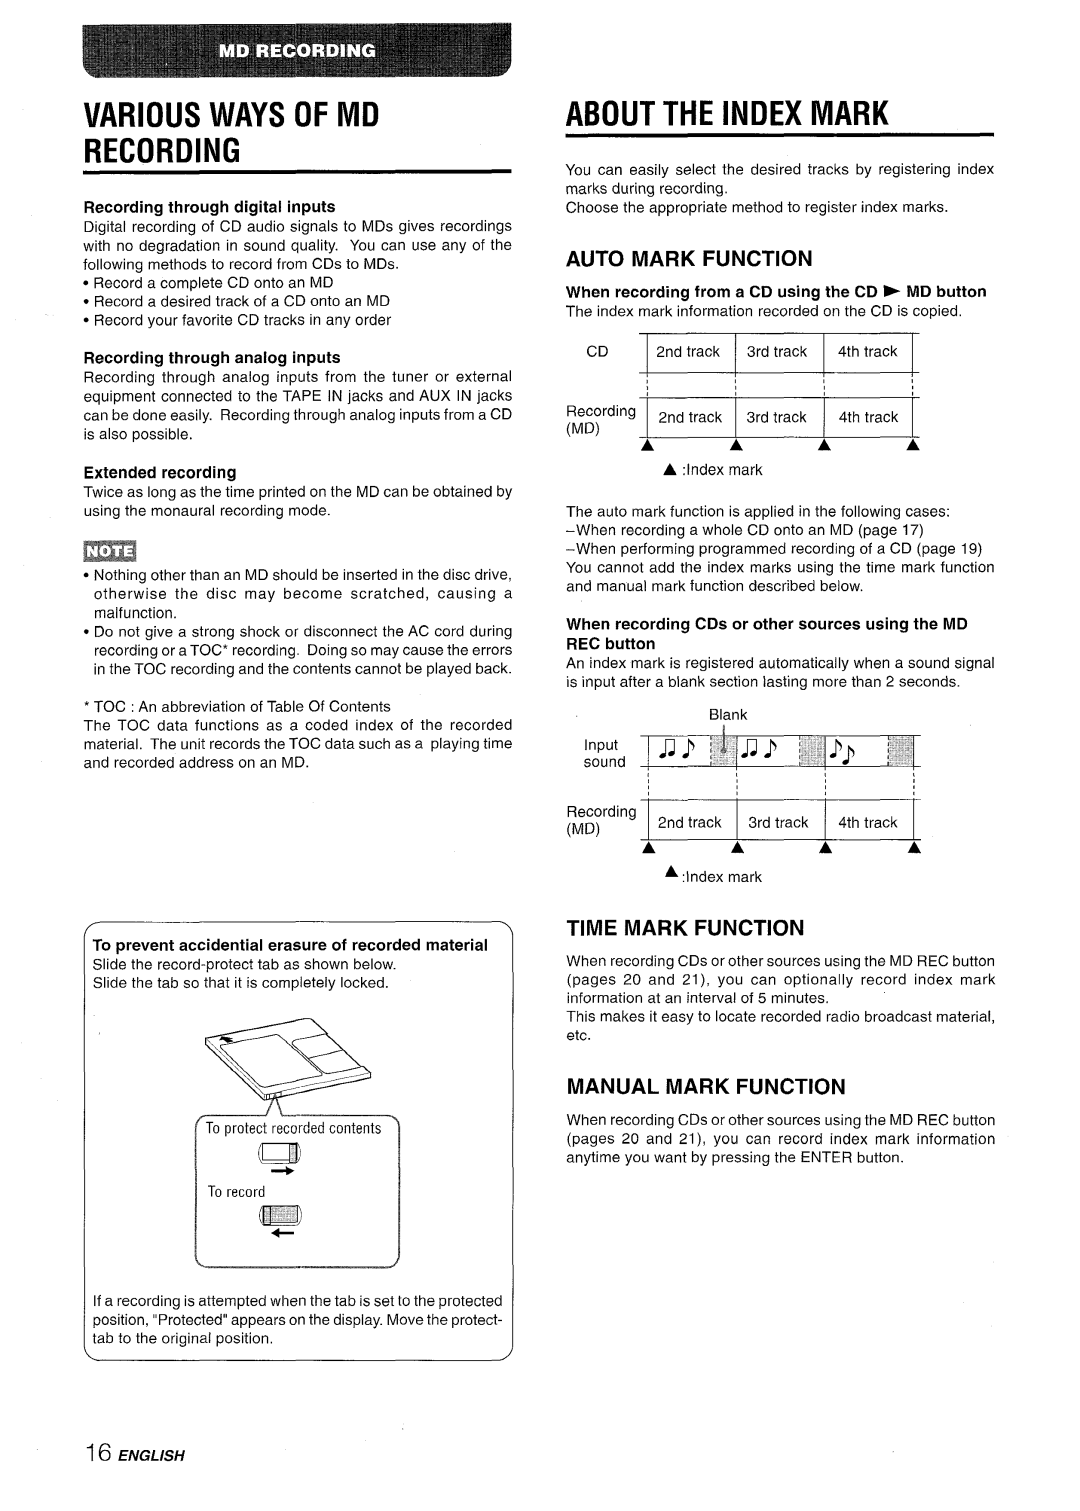 Aiwa XR-MD95 manual Various Ways Of Md Recording, About The Index Mark, Auto Mark Function, Time Mark Function, 2nd track 